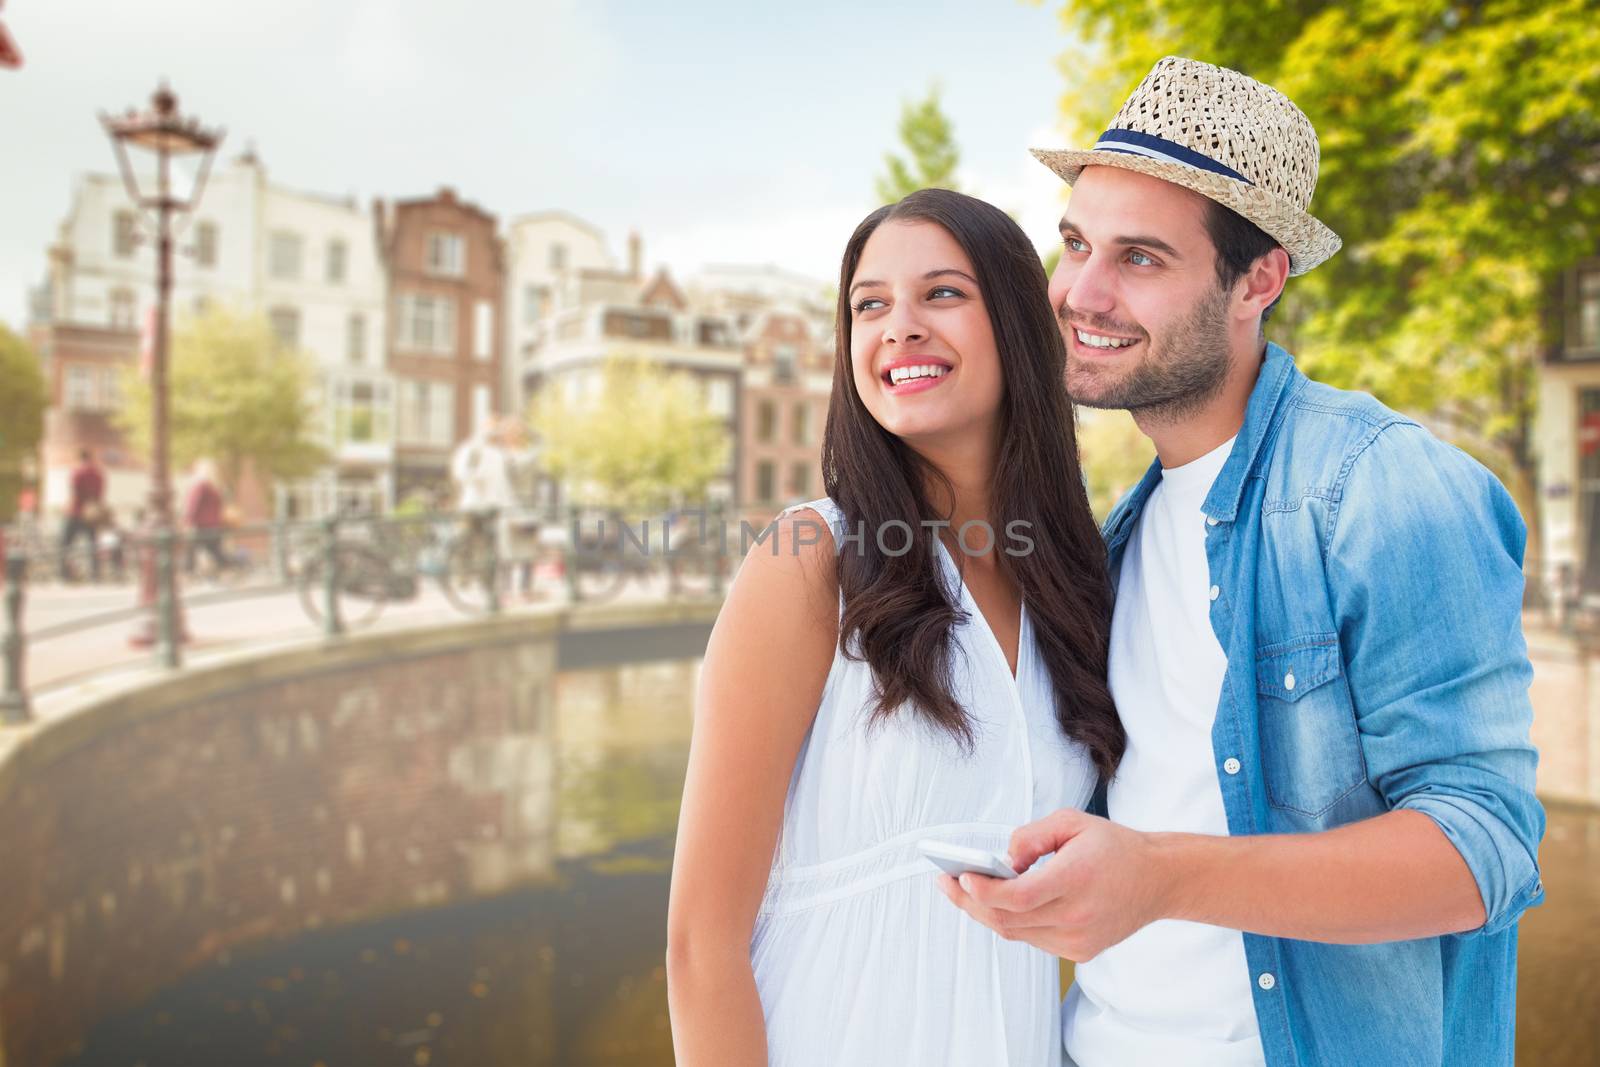 Composite image of happy hipster couple smiling together by Wavebreakmedia